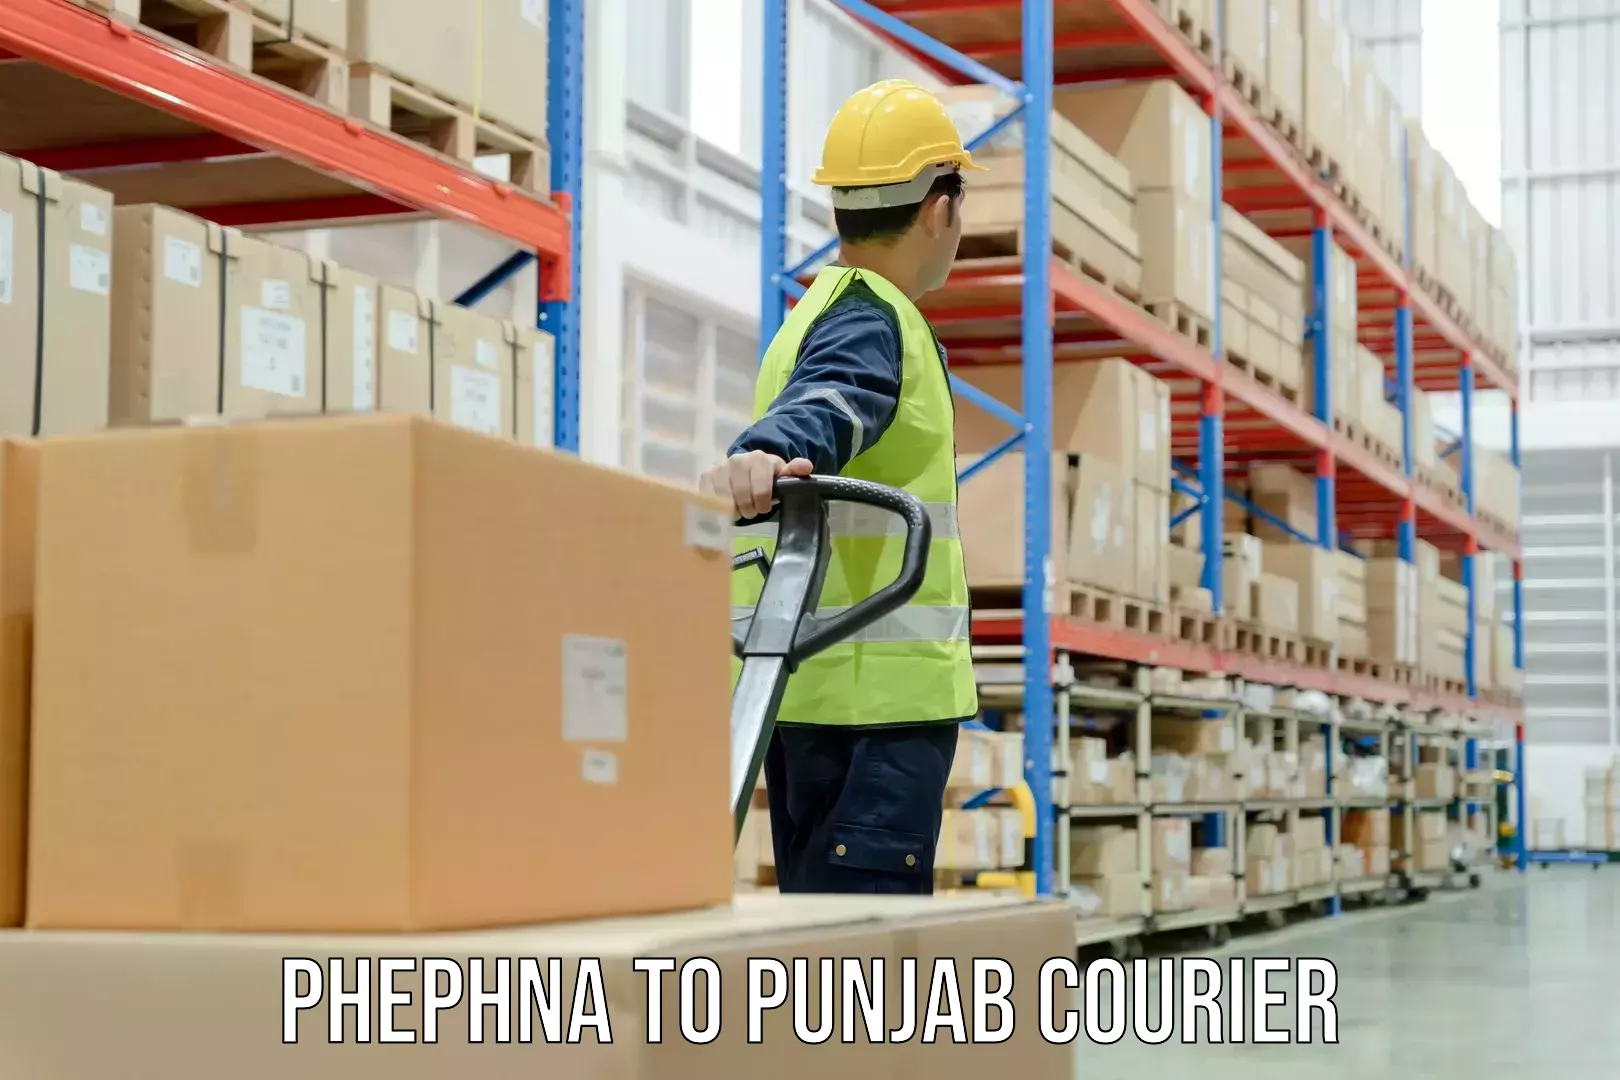 Global shipping solutions in Phephna to Punjab